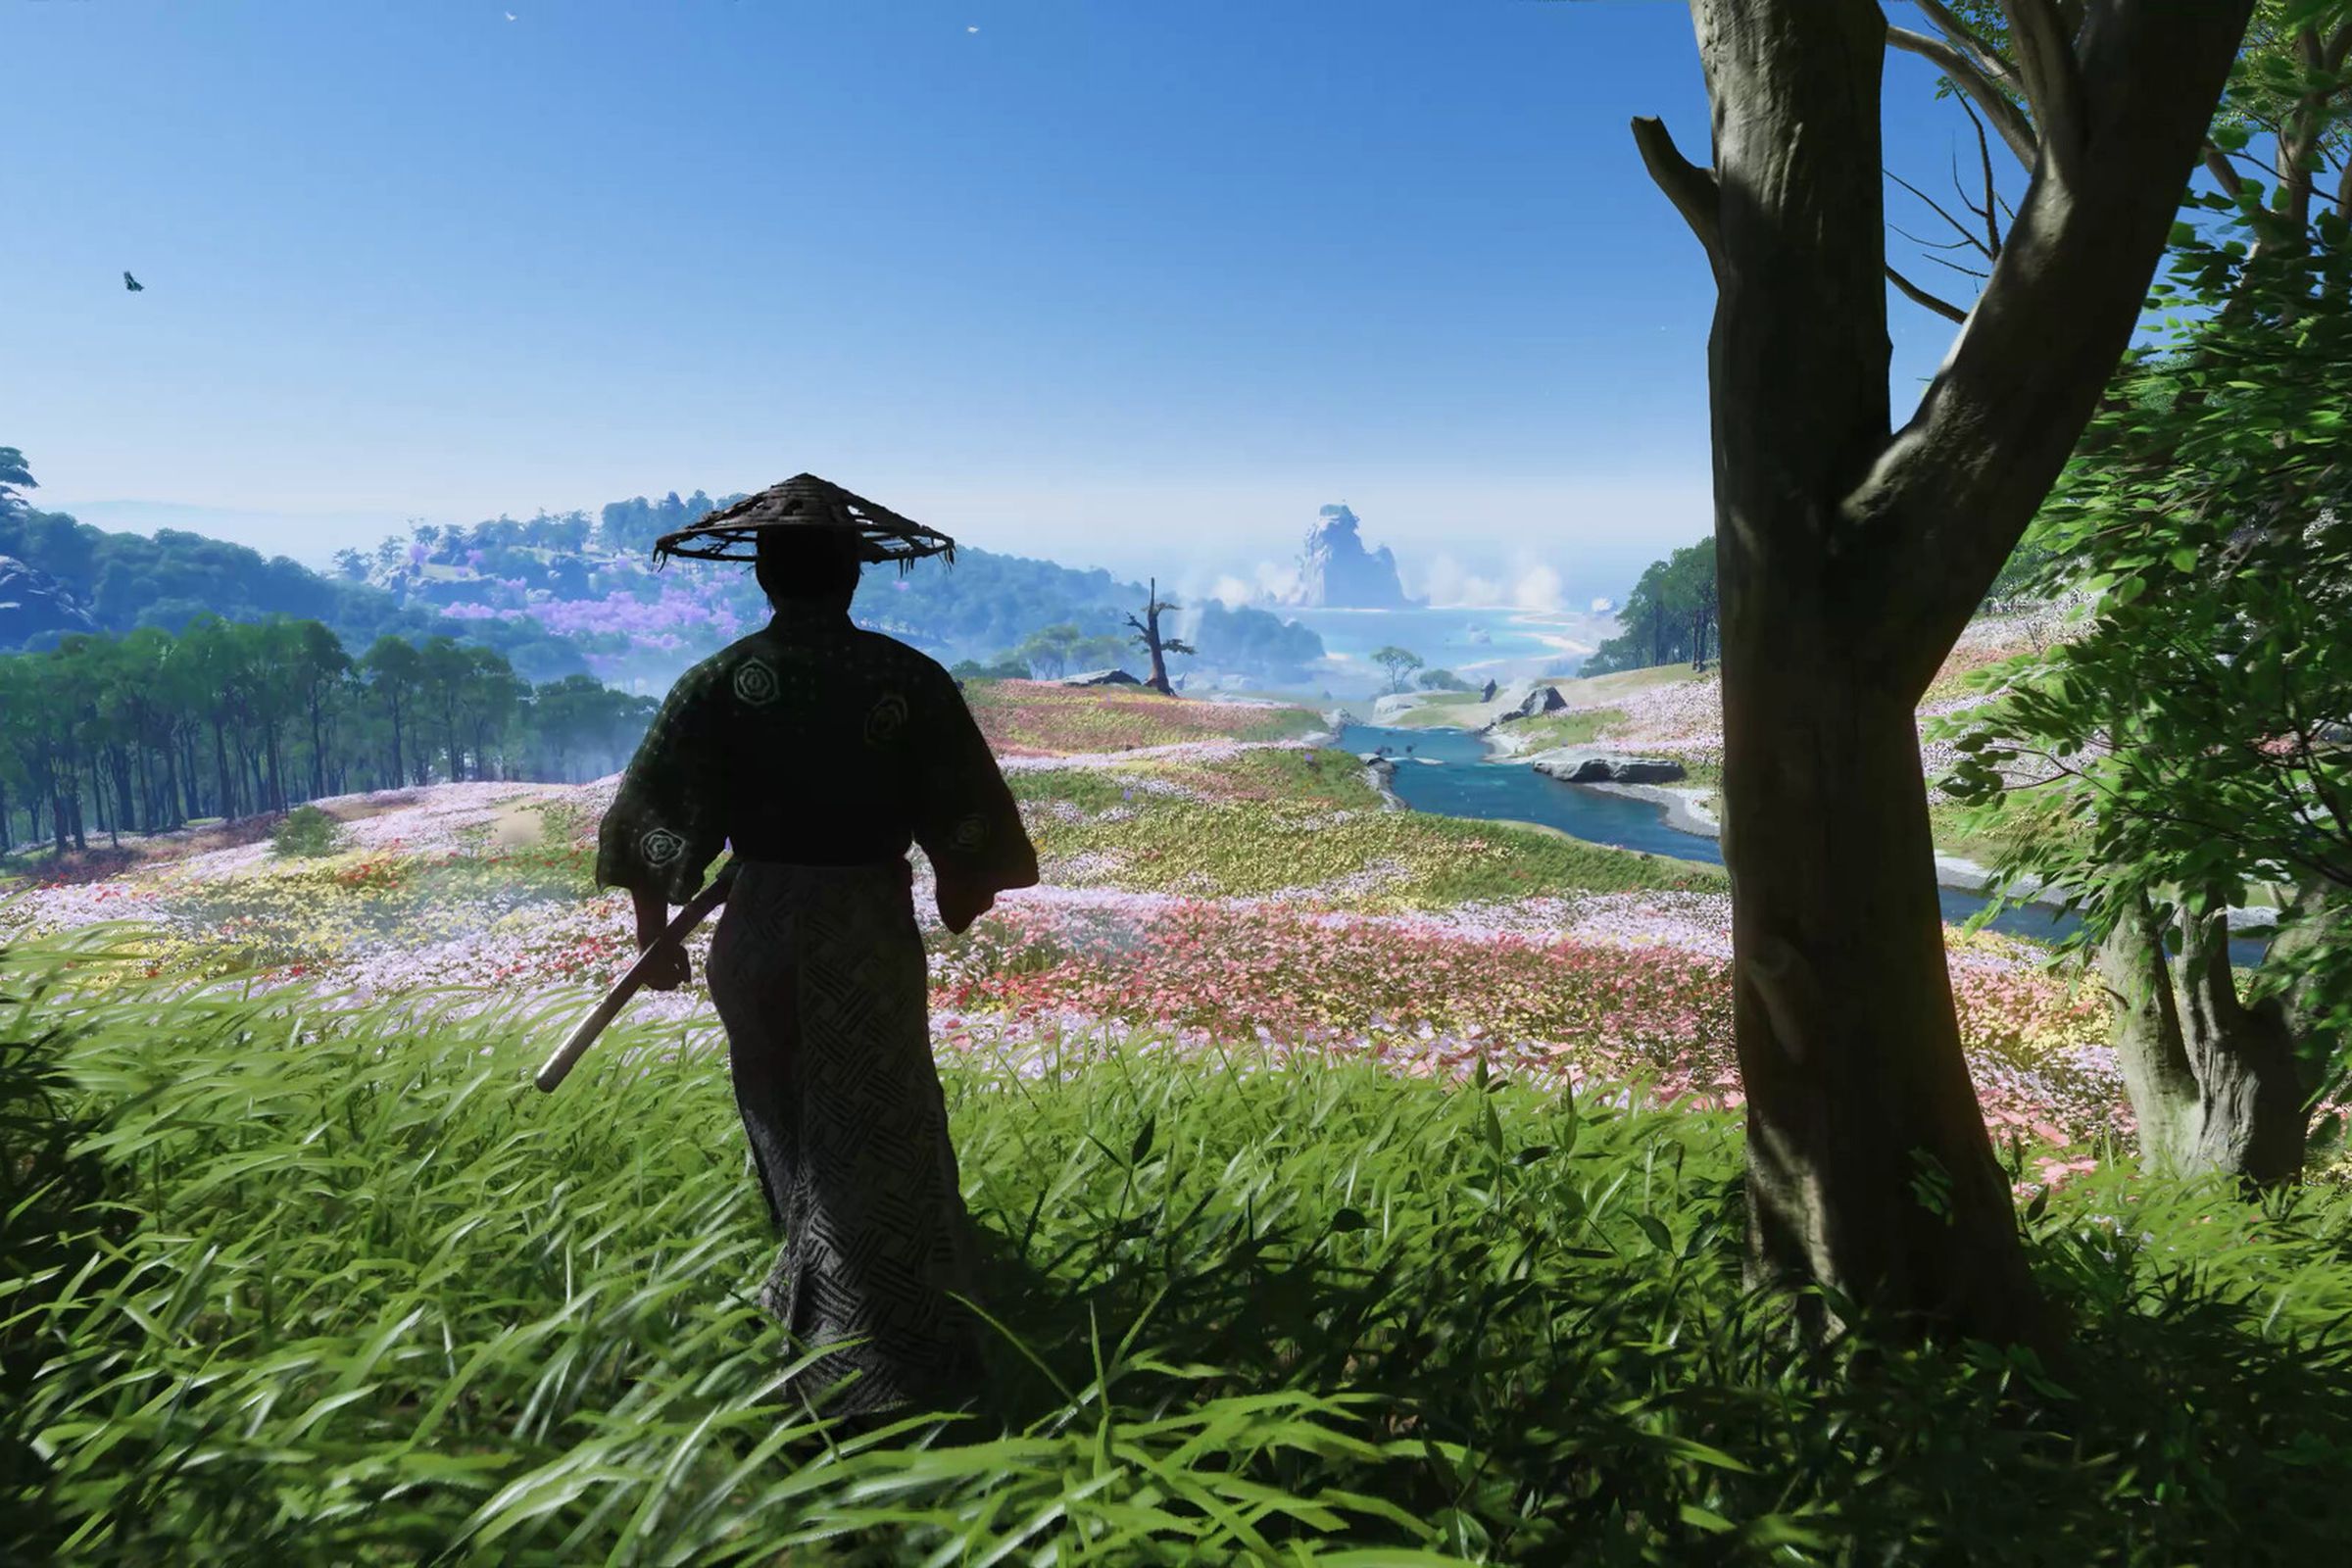 Screenshot from Ghost of Tsushima showing a character overlooking a field, with hills and mountains in the background.